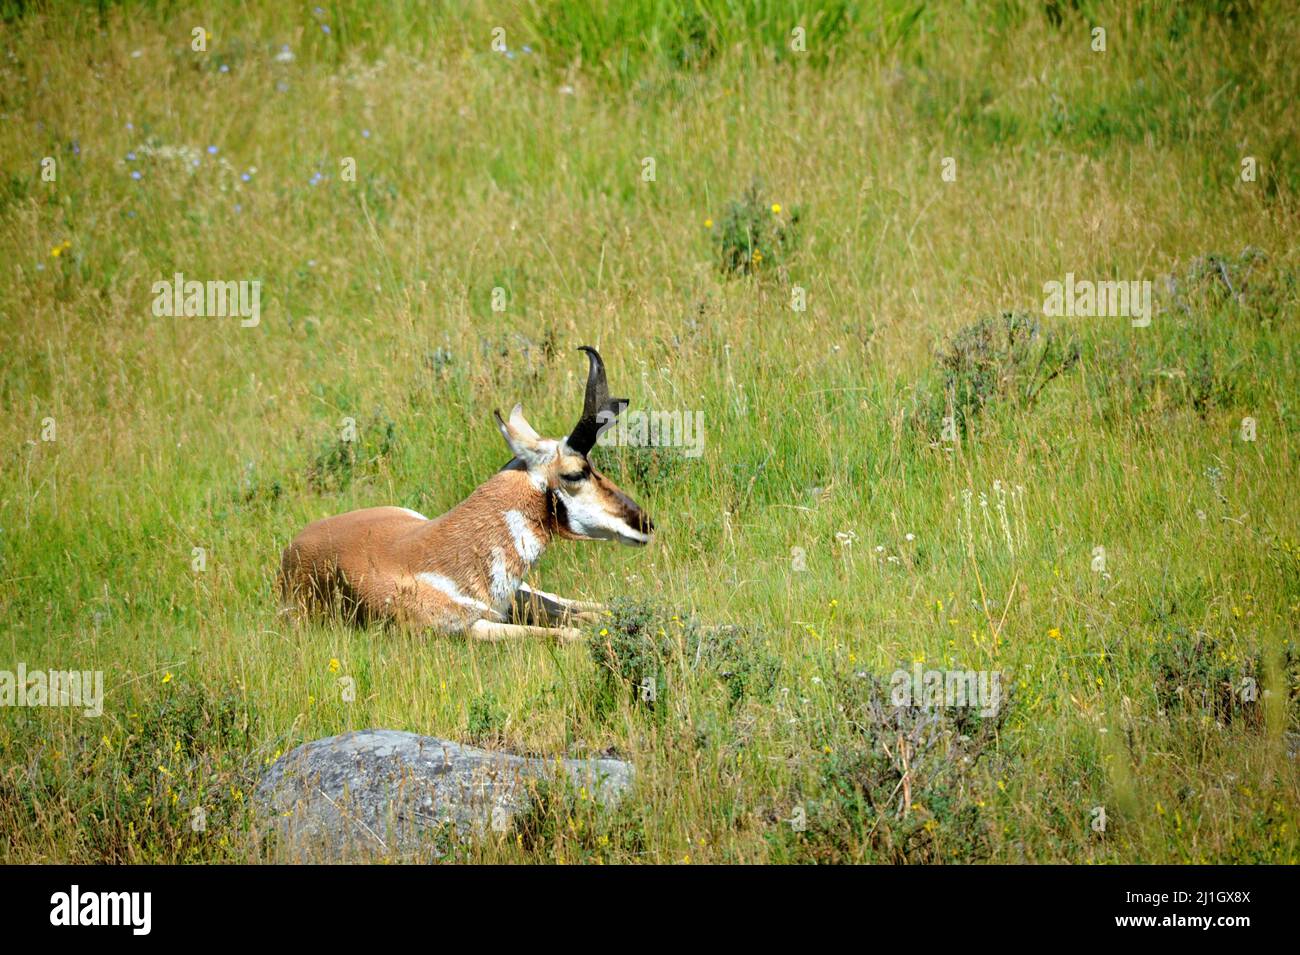 Pronghorn sheep rests in a field of grass in Yellowstone National Park. Stock Photo